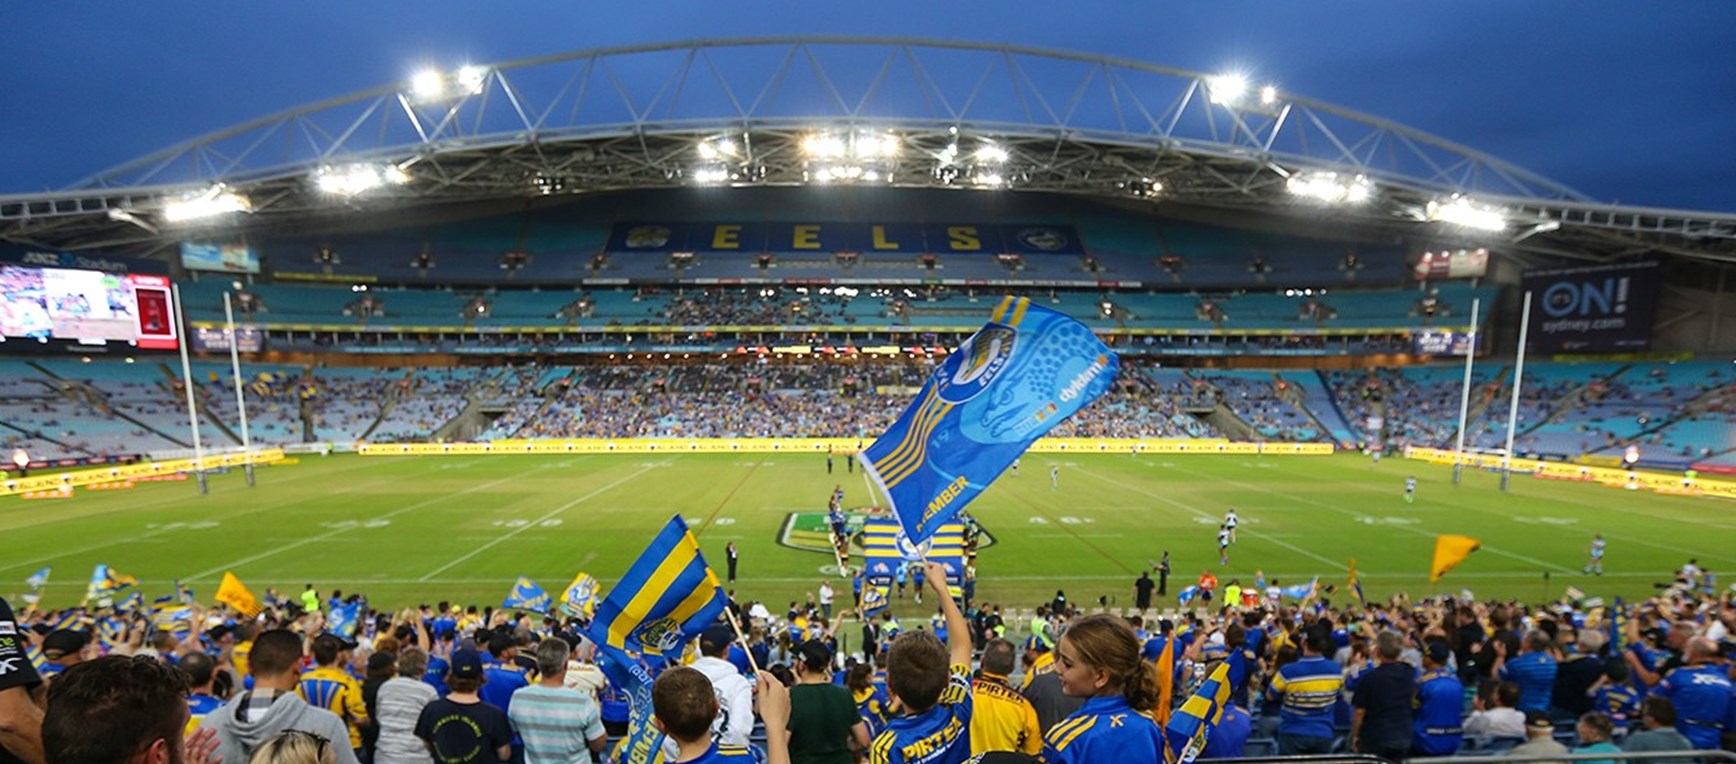 AROUND THE GROUNDS | Eels v Sharks, Round Four